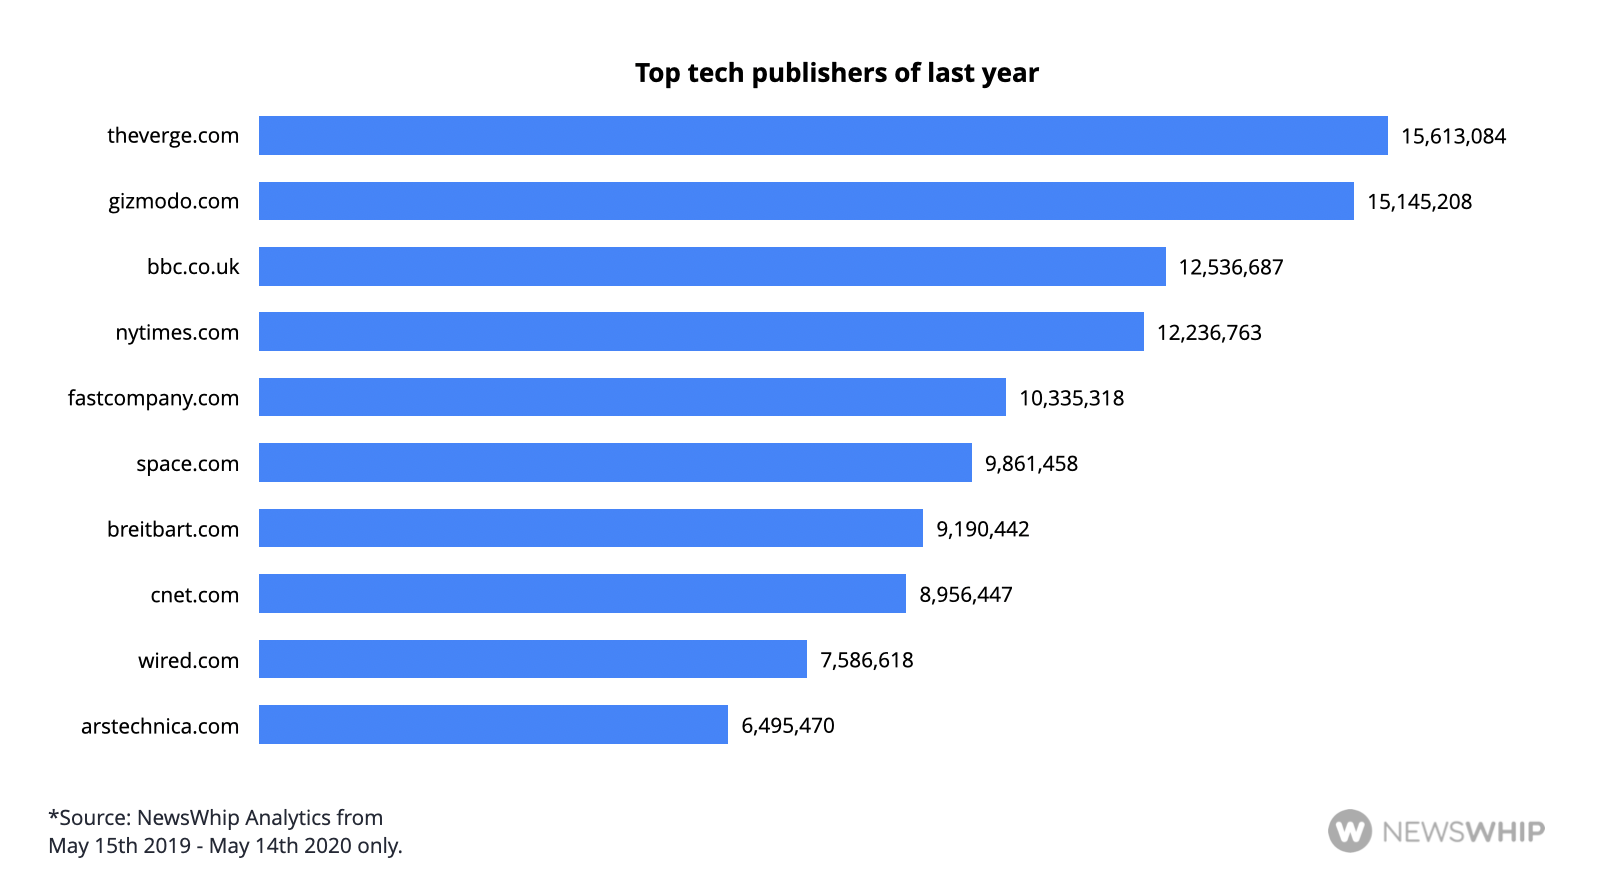 Histogram showing the top tech publishers of 2020